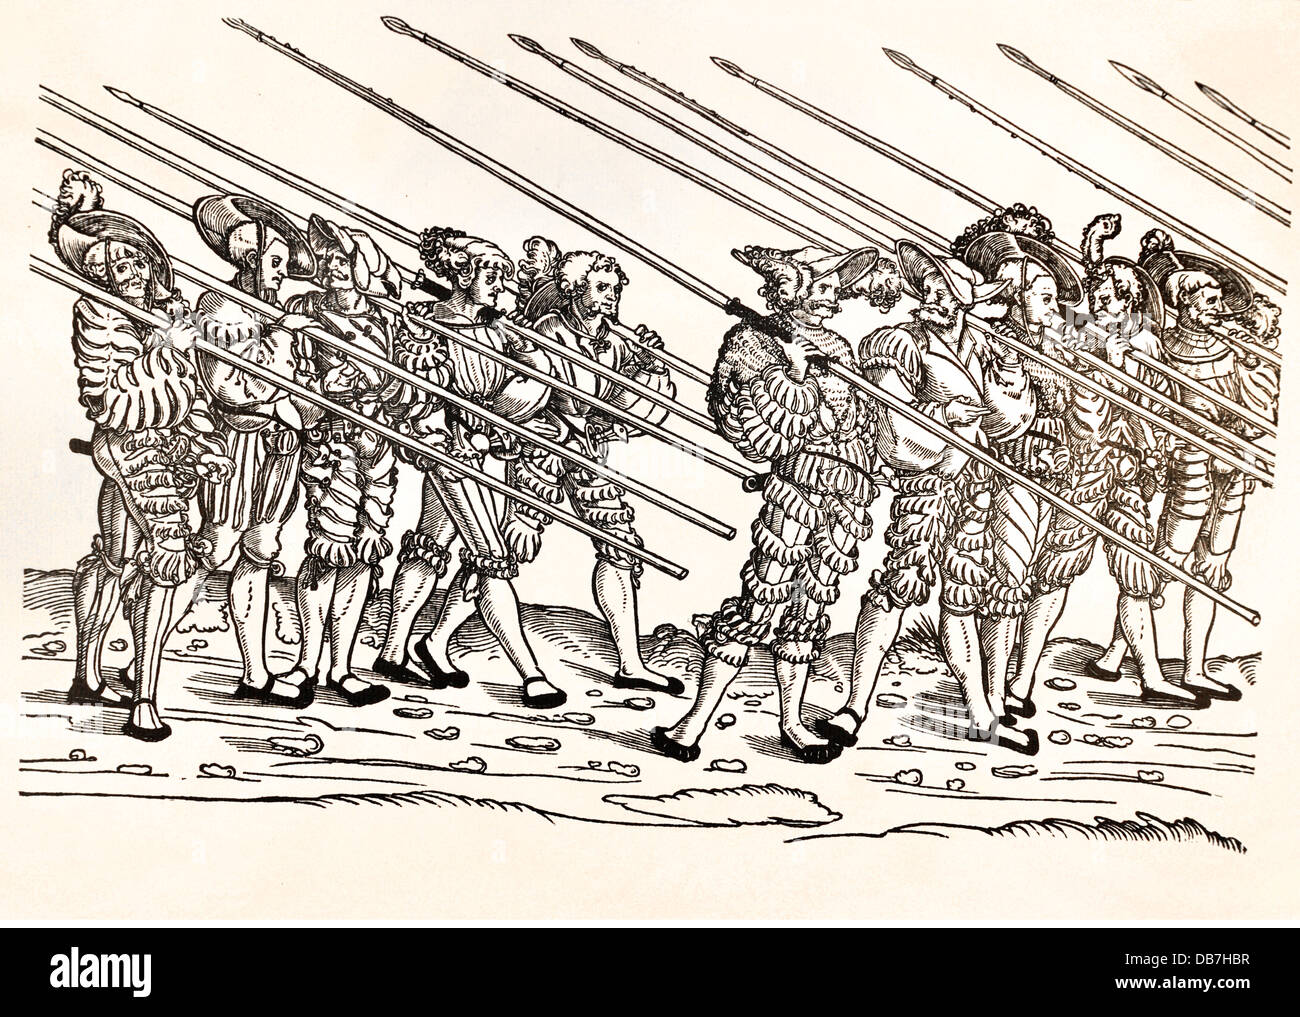 military,lansquenets,marching lansquenets,full length,woodcut,circa 1510 - 1520,from: Warriors of his Roman Imperial Majesty at the age of the lansquenets,edited by August Johann Count Breuner von Enkevoirt,Vienna 1883,16th century,fine arts,art,graphic,graphics,Holy Roman Empire,soldier,soldiers,clothes,helmet,helmets,hat,hats,beret,berets,beard,beards,moustache,mustache,moustaches,mustaches,walrus moustache,walrus moustaches,moustache,mustache,moustaches,mustaches,doublet,jerkin,breeches,knee breeches,weapon,arms,weapo,Additional-Rights-Clearences-Not Available Stock Photo